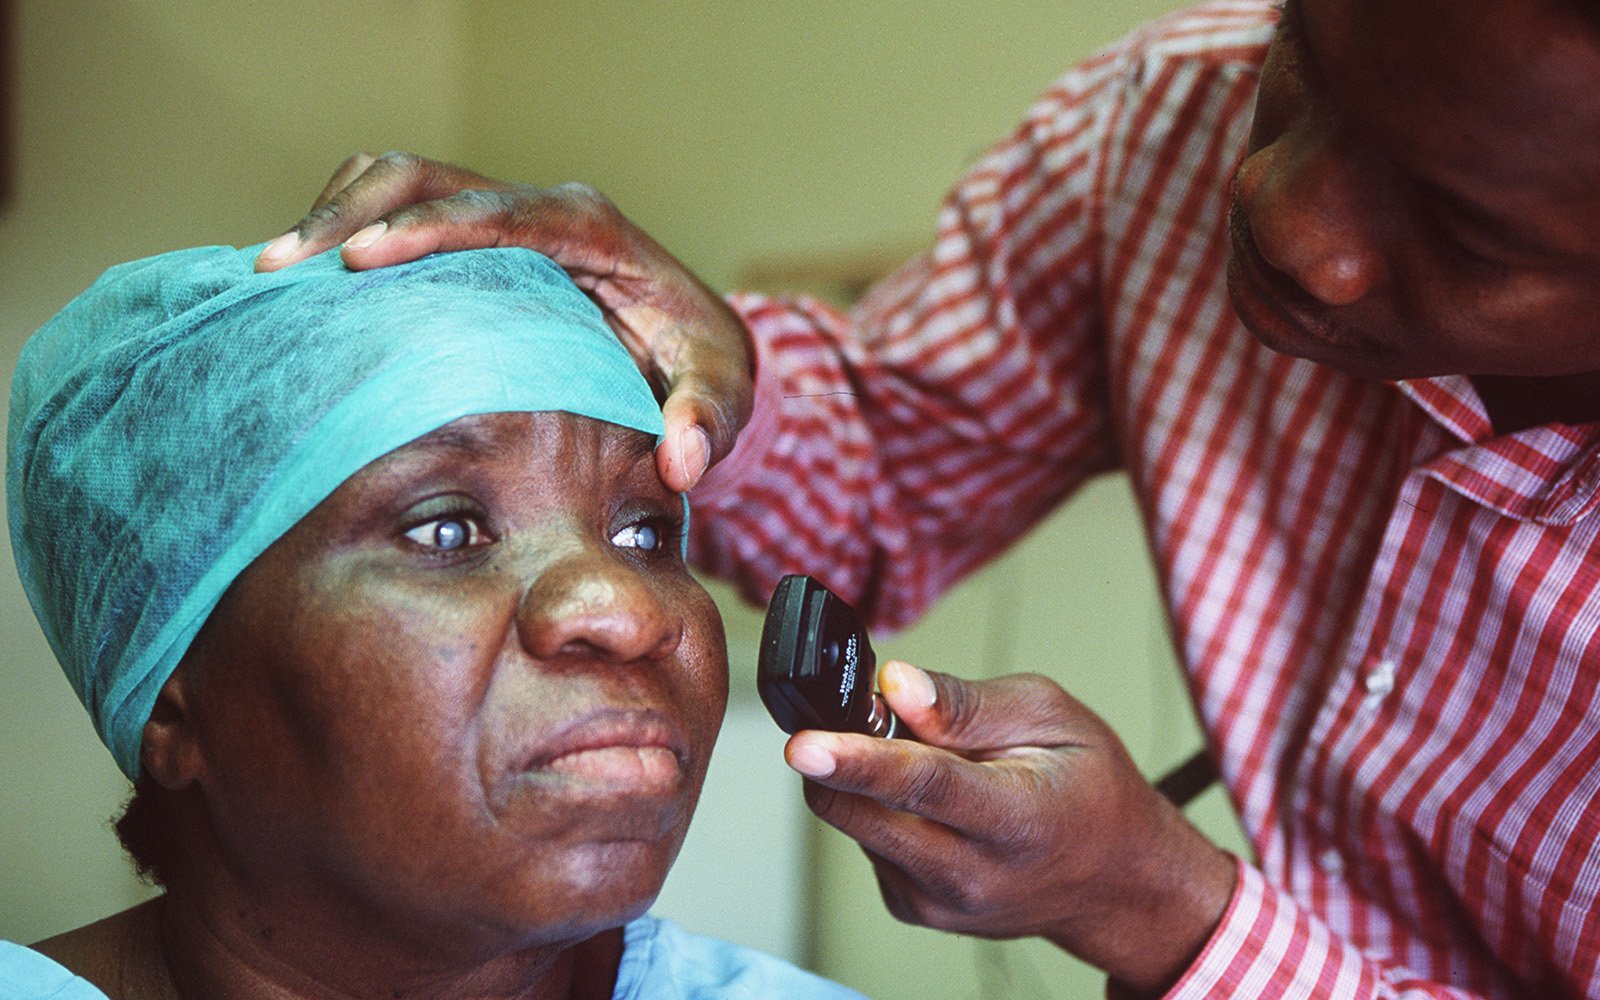 Woman with cataract getting examined